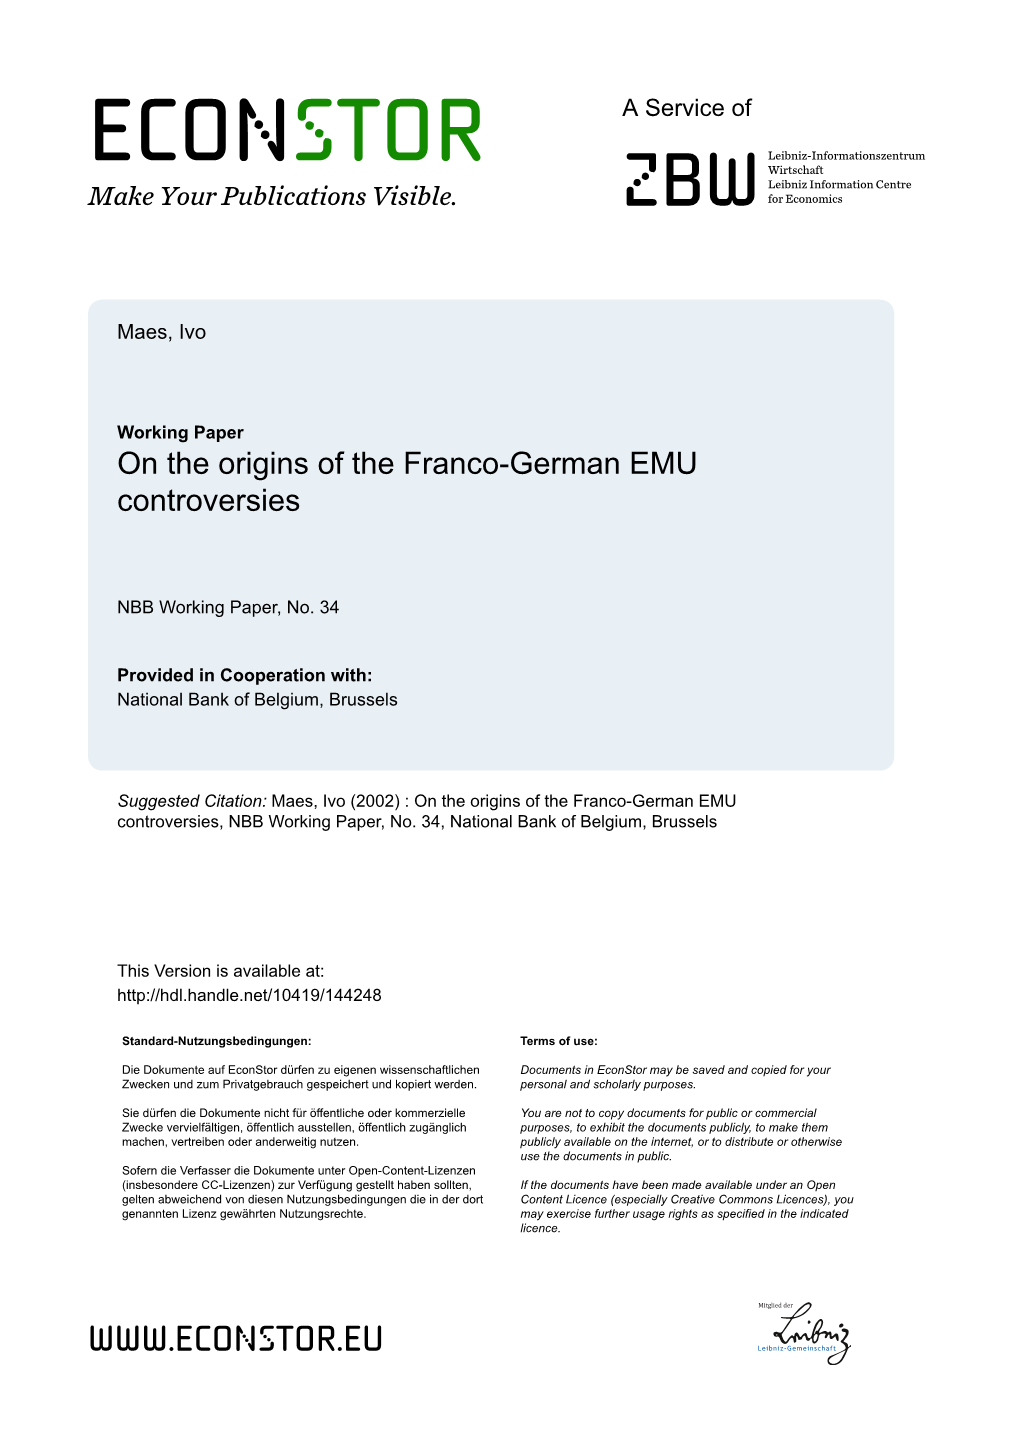 On the Origins of the Franco-German EMU Controversies